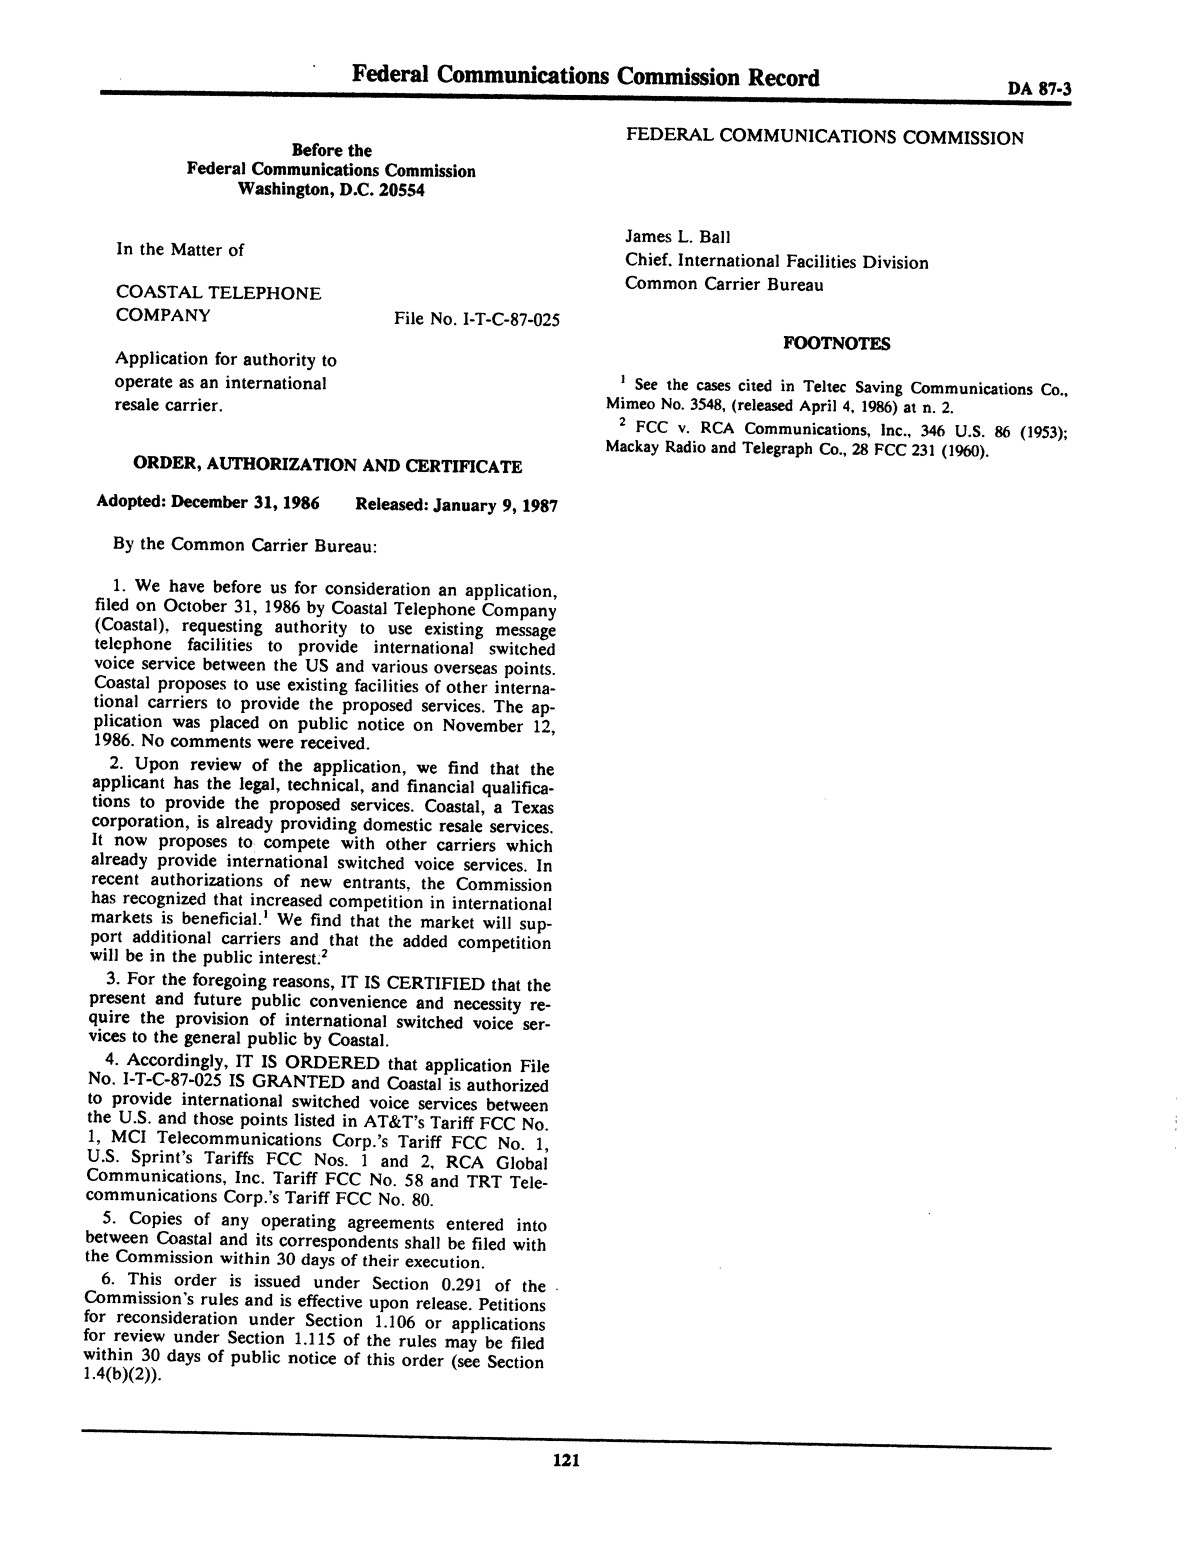 FCC Record, Volume 2, No. 1, Pages 1 to 409, January 5 - January 16, 1987
                                                
                                                    121
                                                